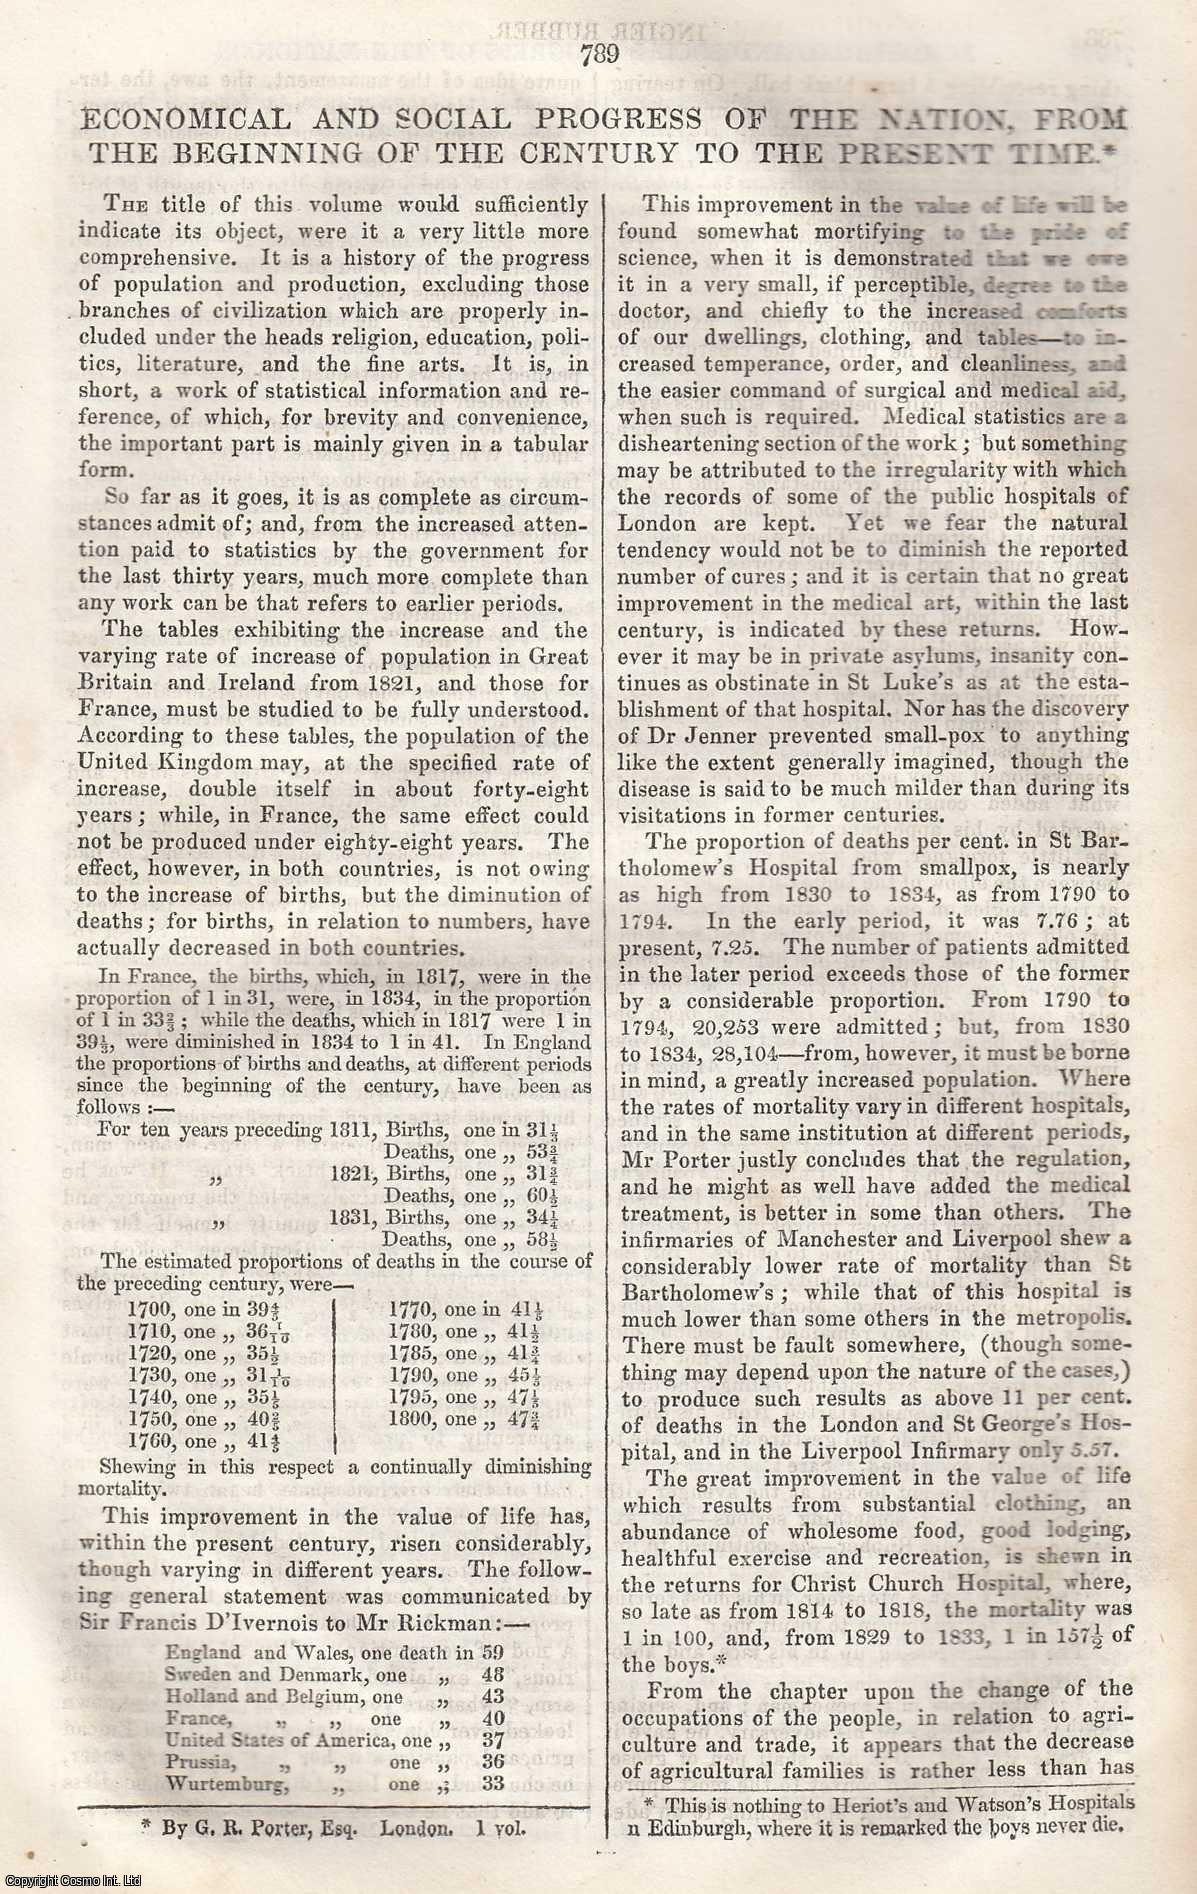 --- - Economical and Social Progress of The Nation. An original article from Tait's Edinburgh Magazine, 1836.